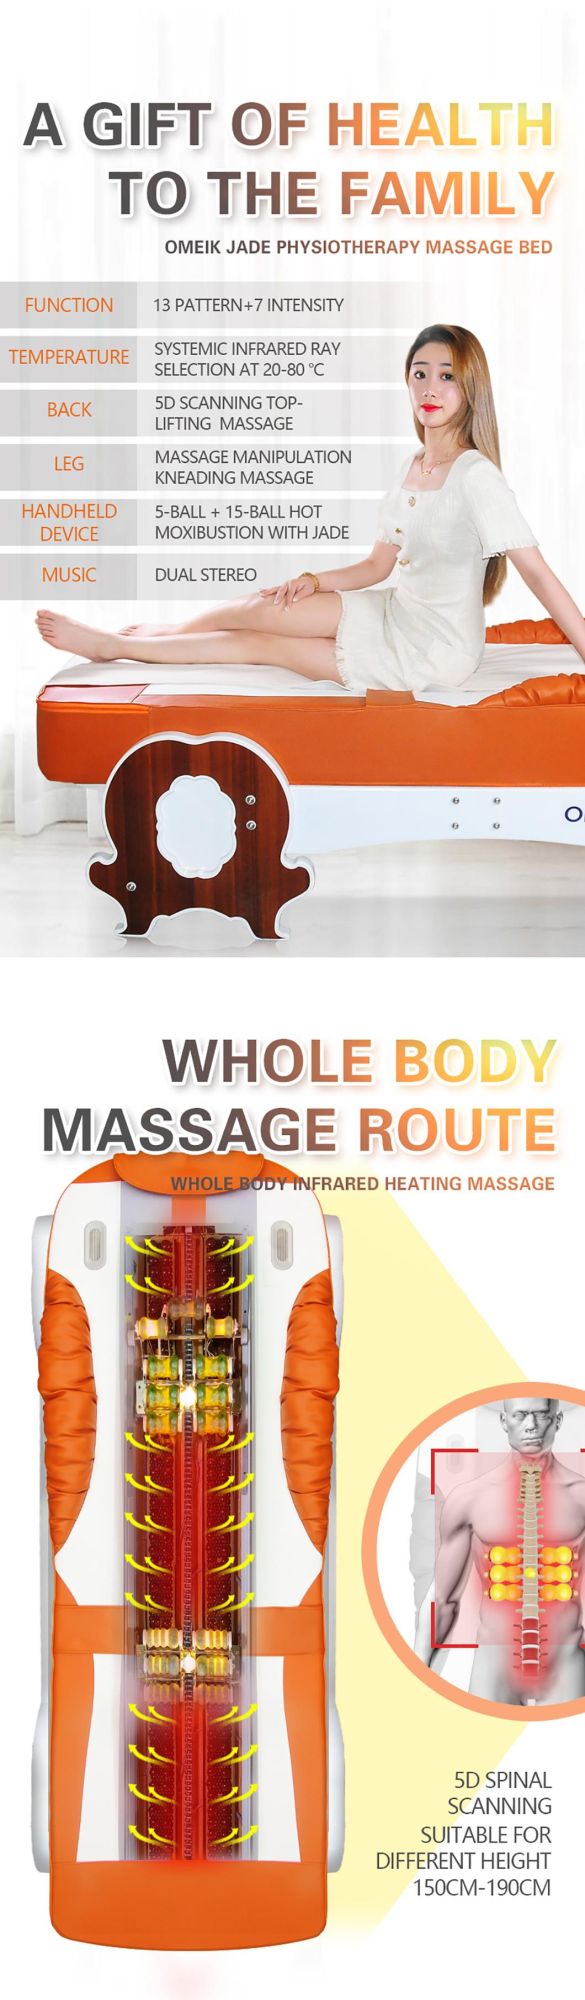 Full Body Rolling Massage Thermal Energy Storne Heating Jade Massage Bed